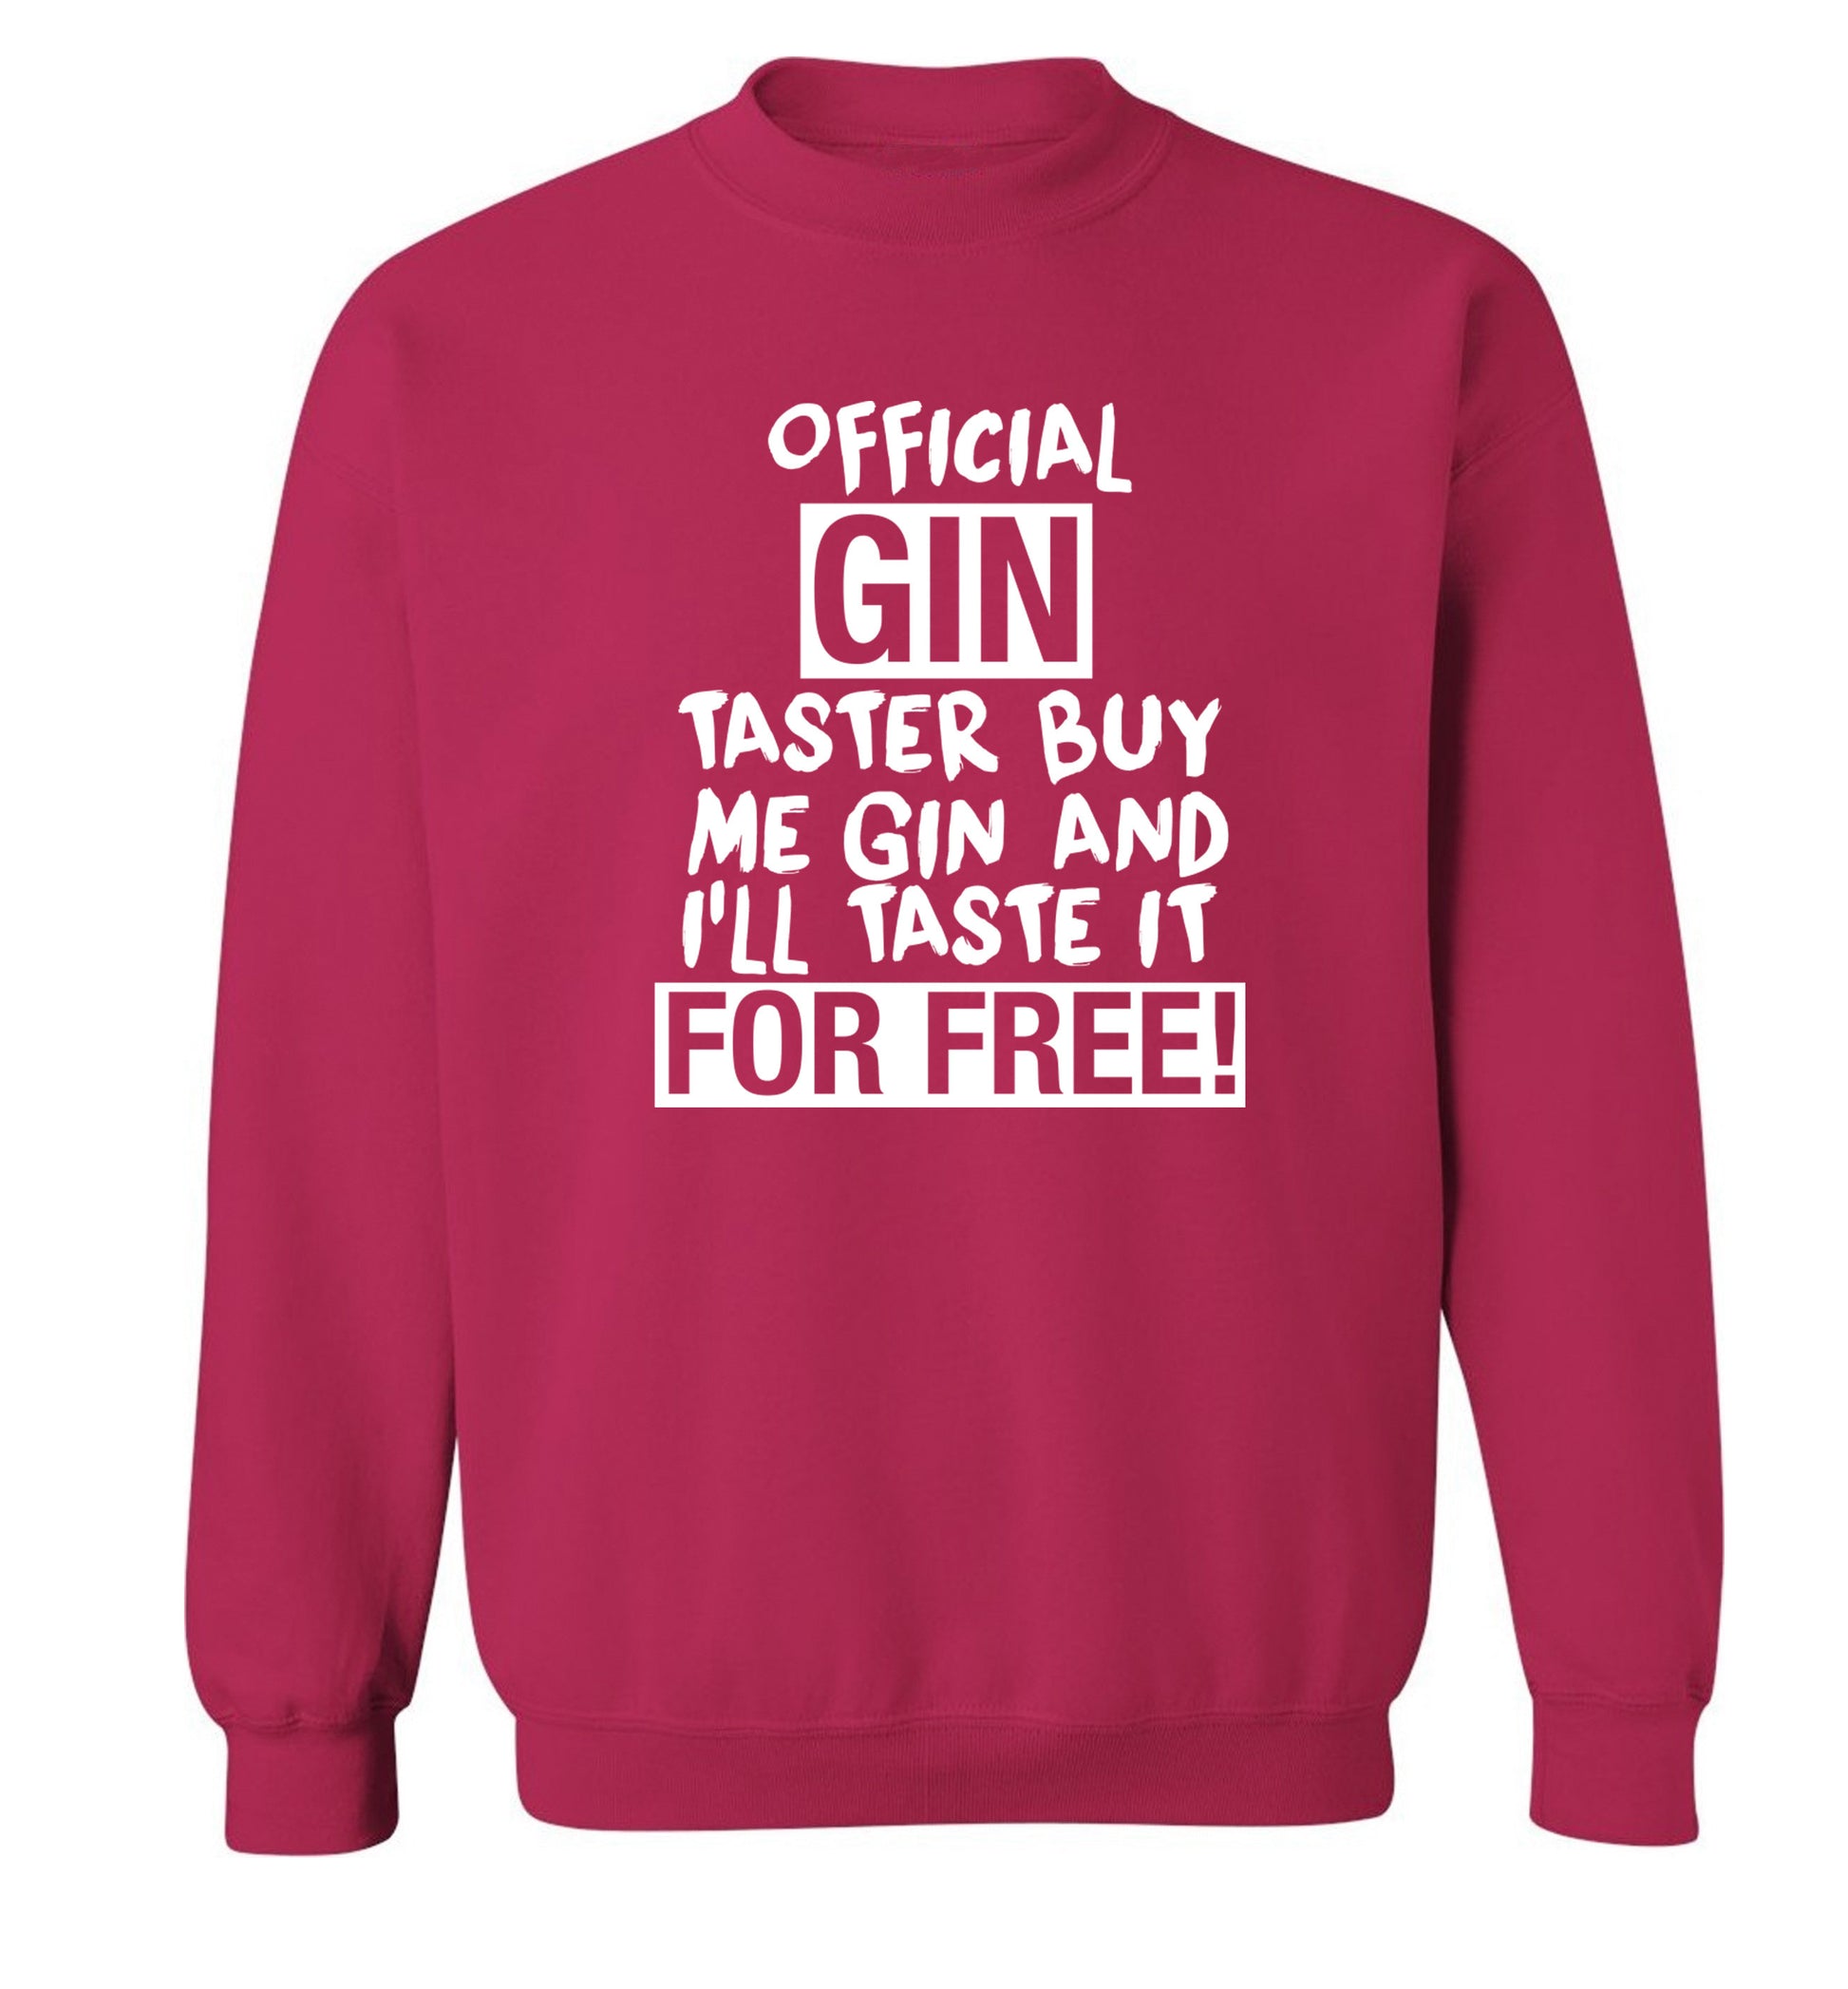 Official gin taster buy me gin and I'll taste it for free Adult's unisex pink Sweater 2XL